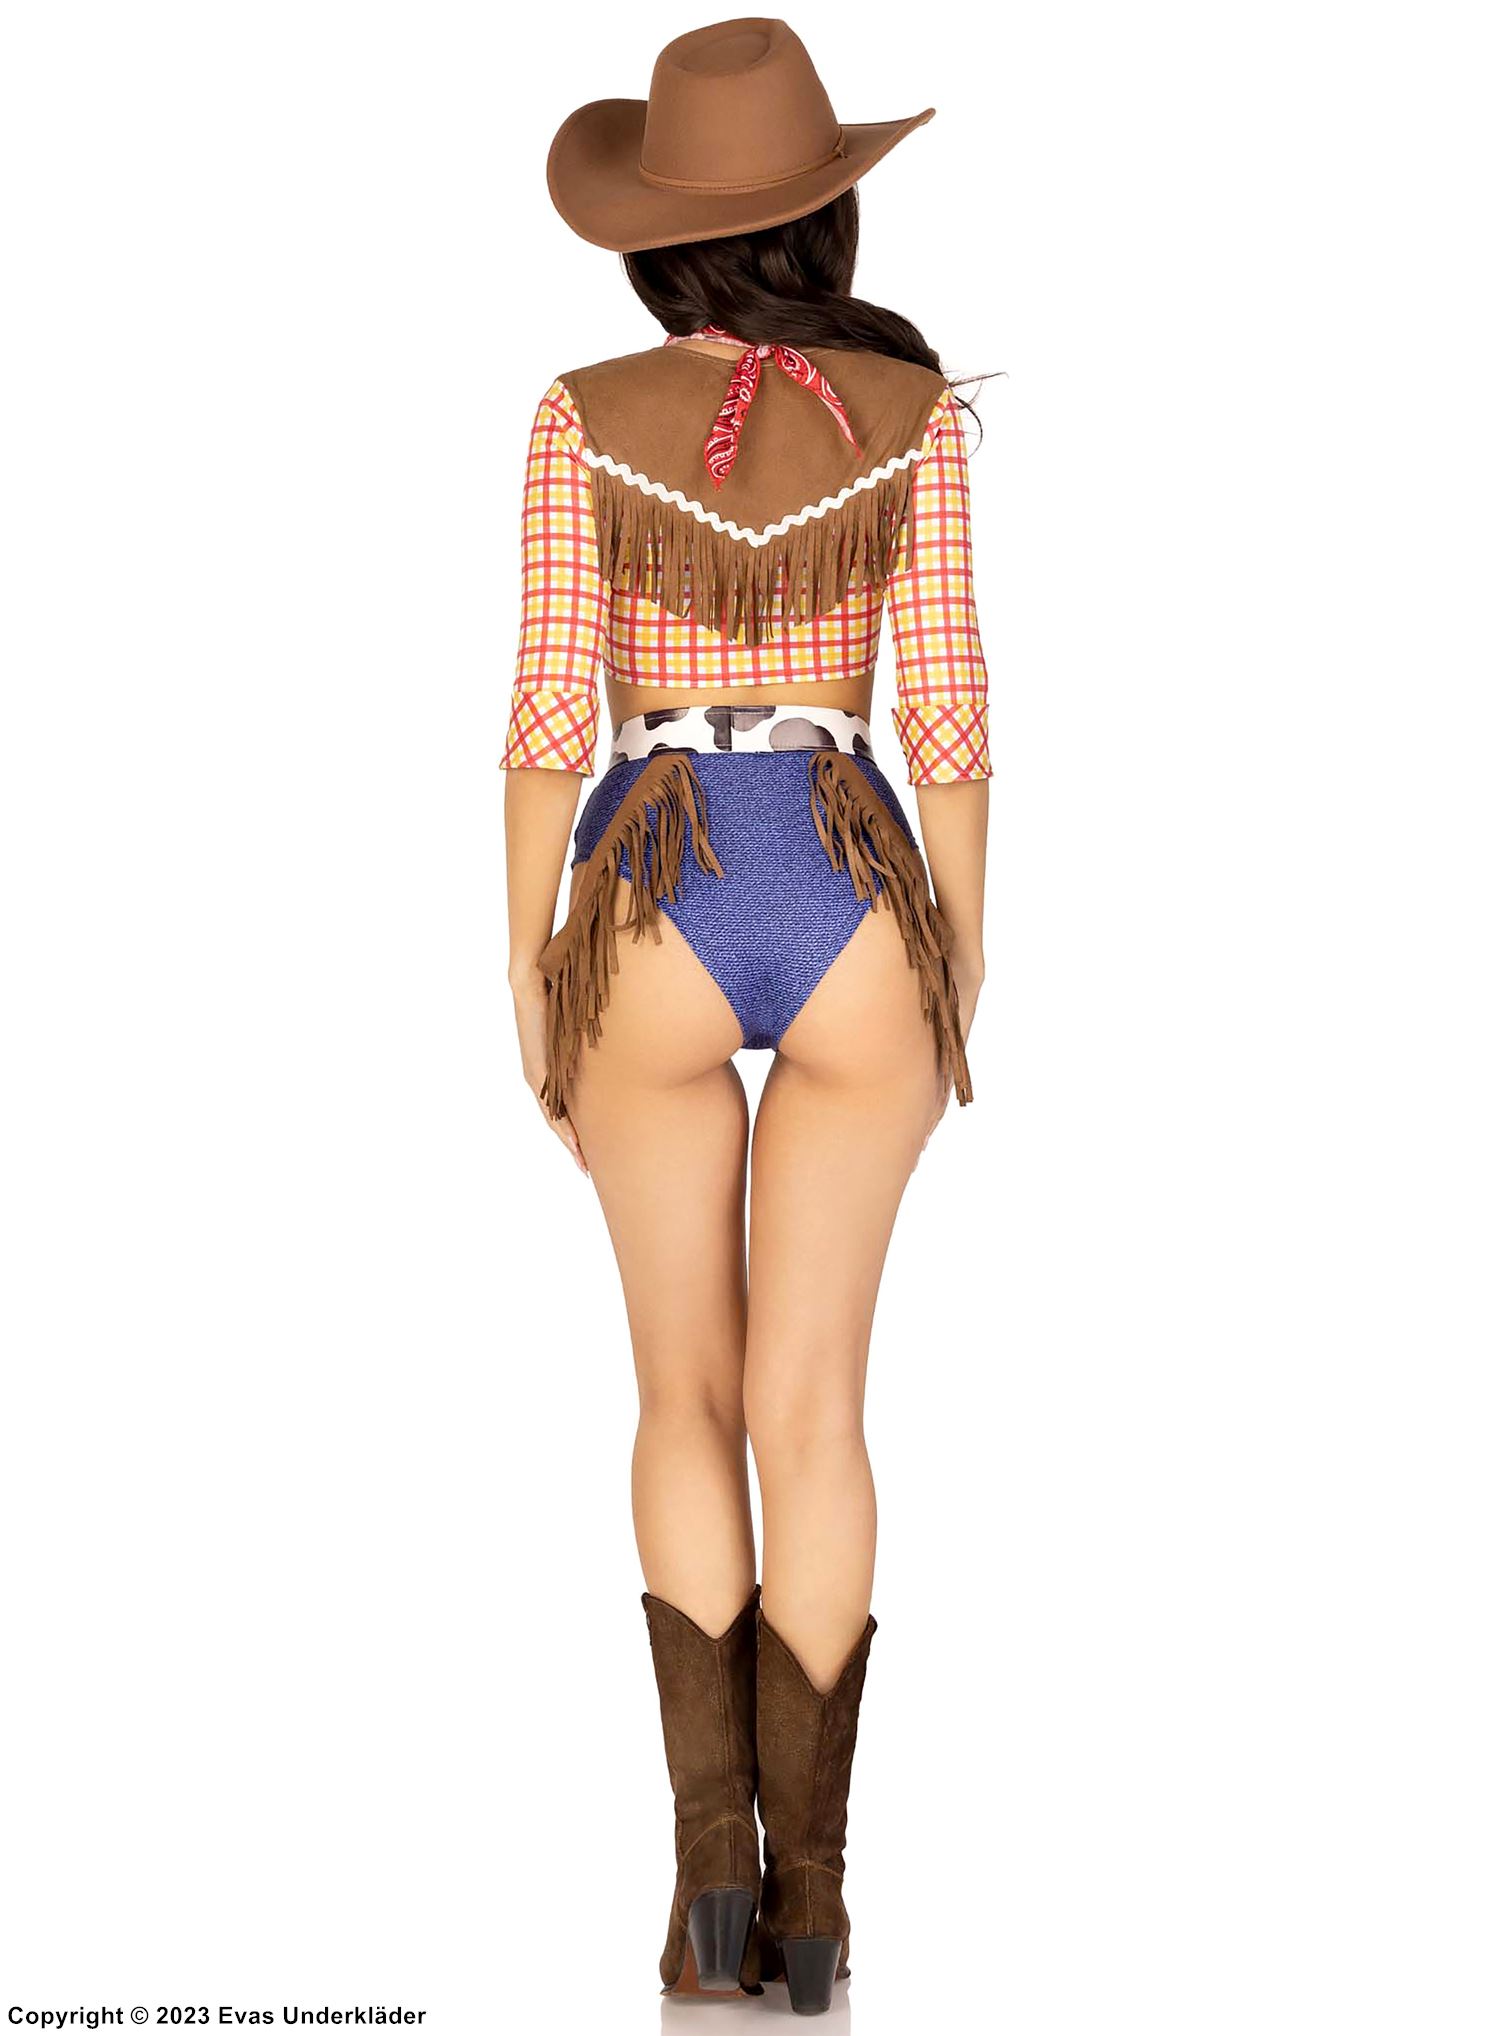 Woody from Toy Story, top and shorts costume, fringes, 3/4 length sleeves, scott-checkered pattern